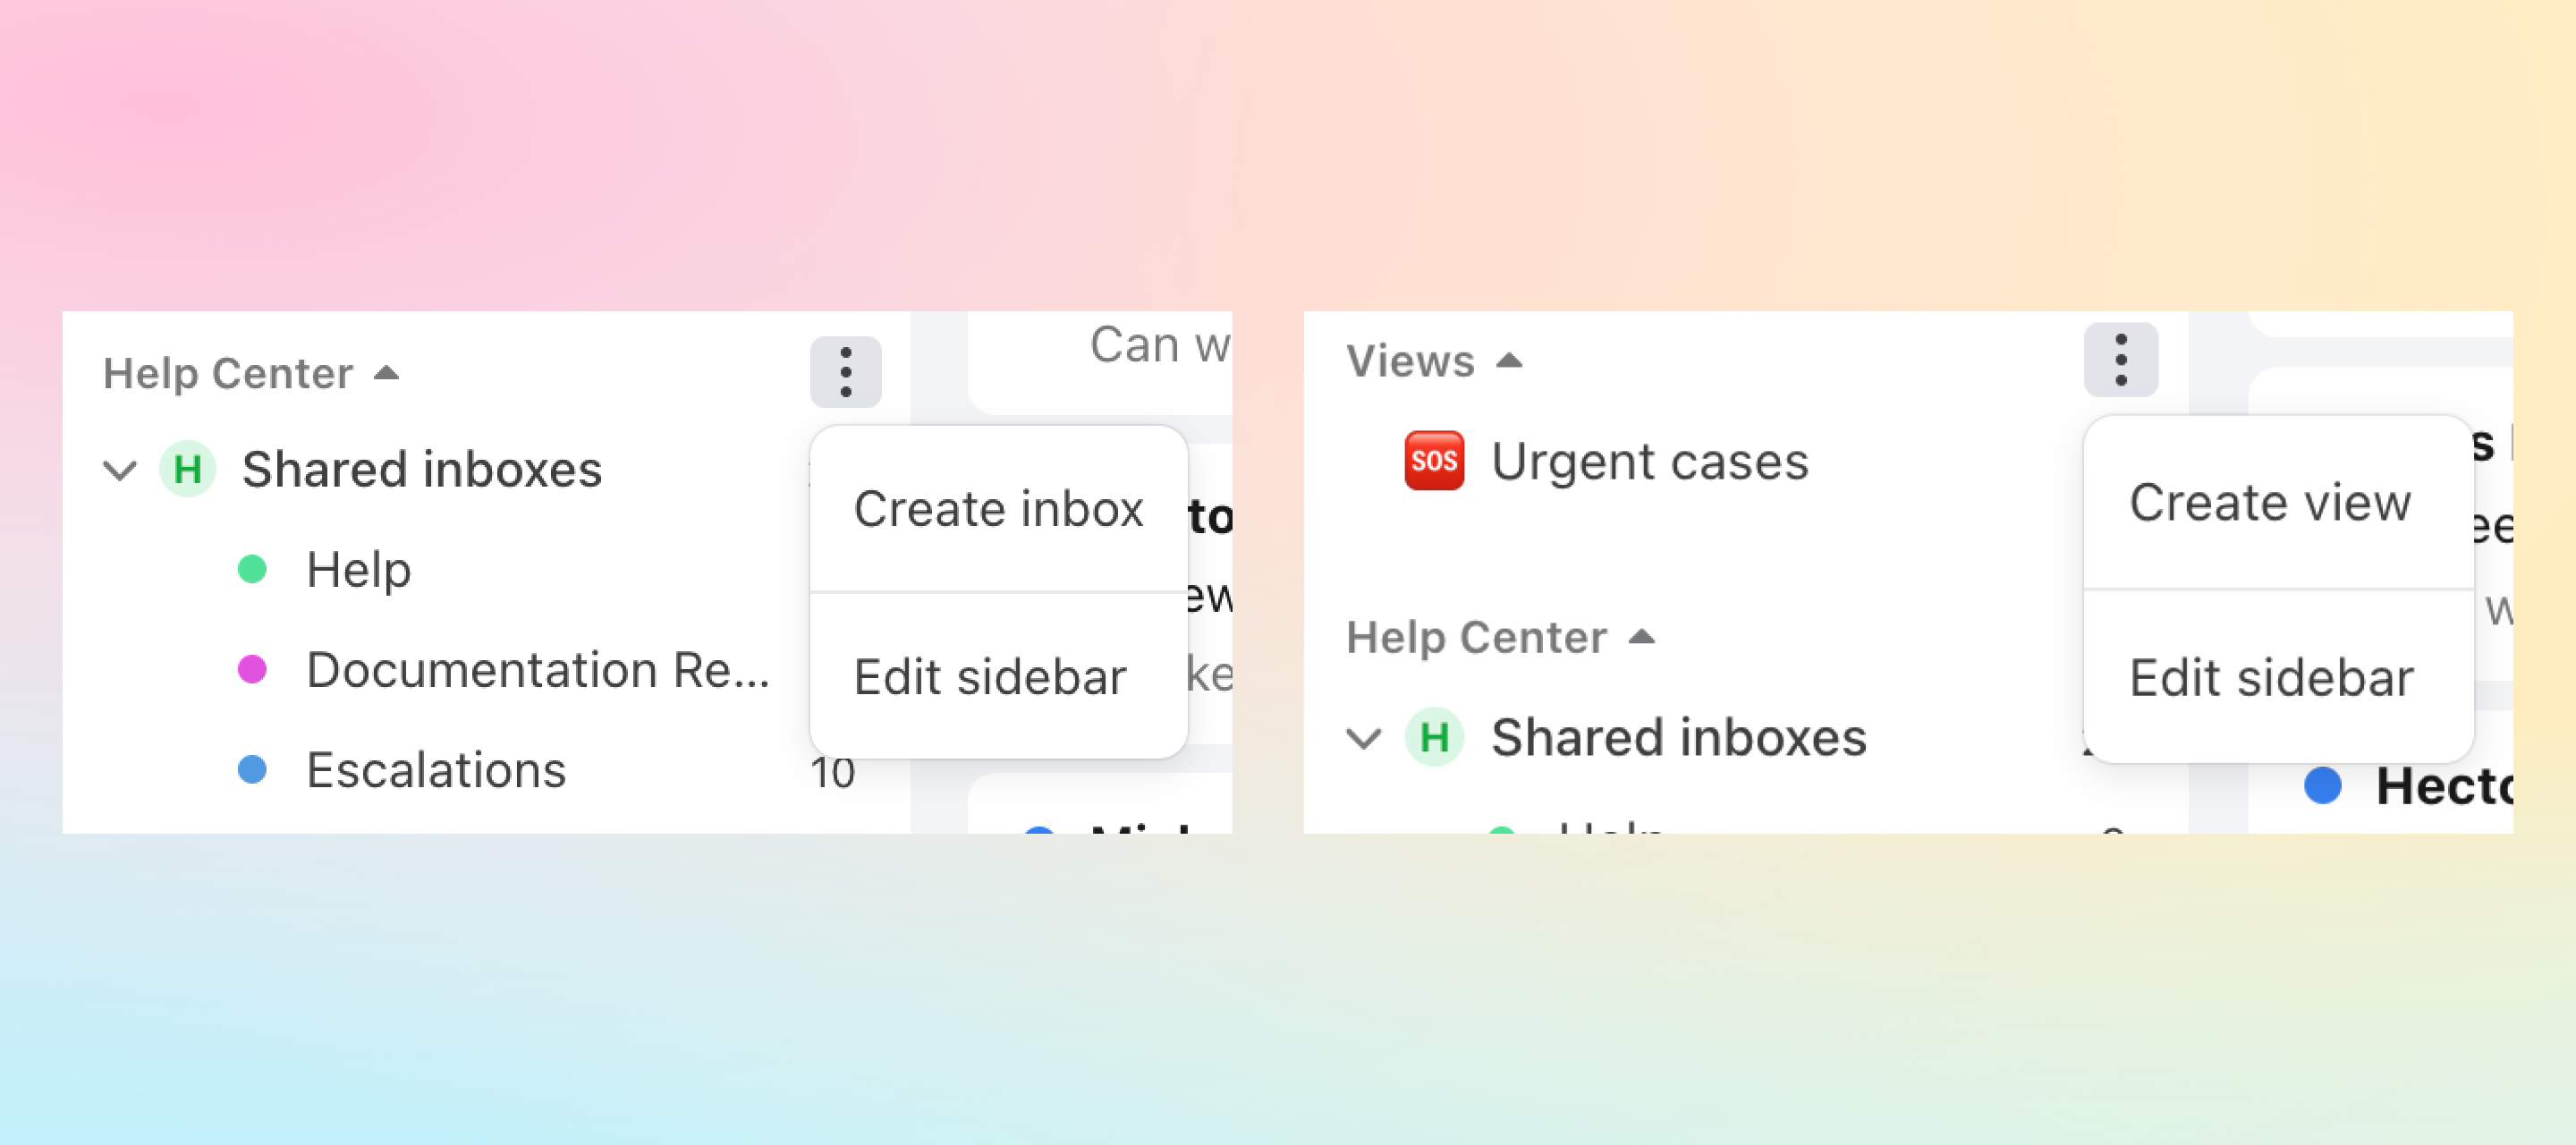 Easily create views and shared inboxes